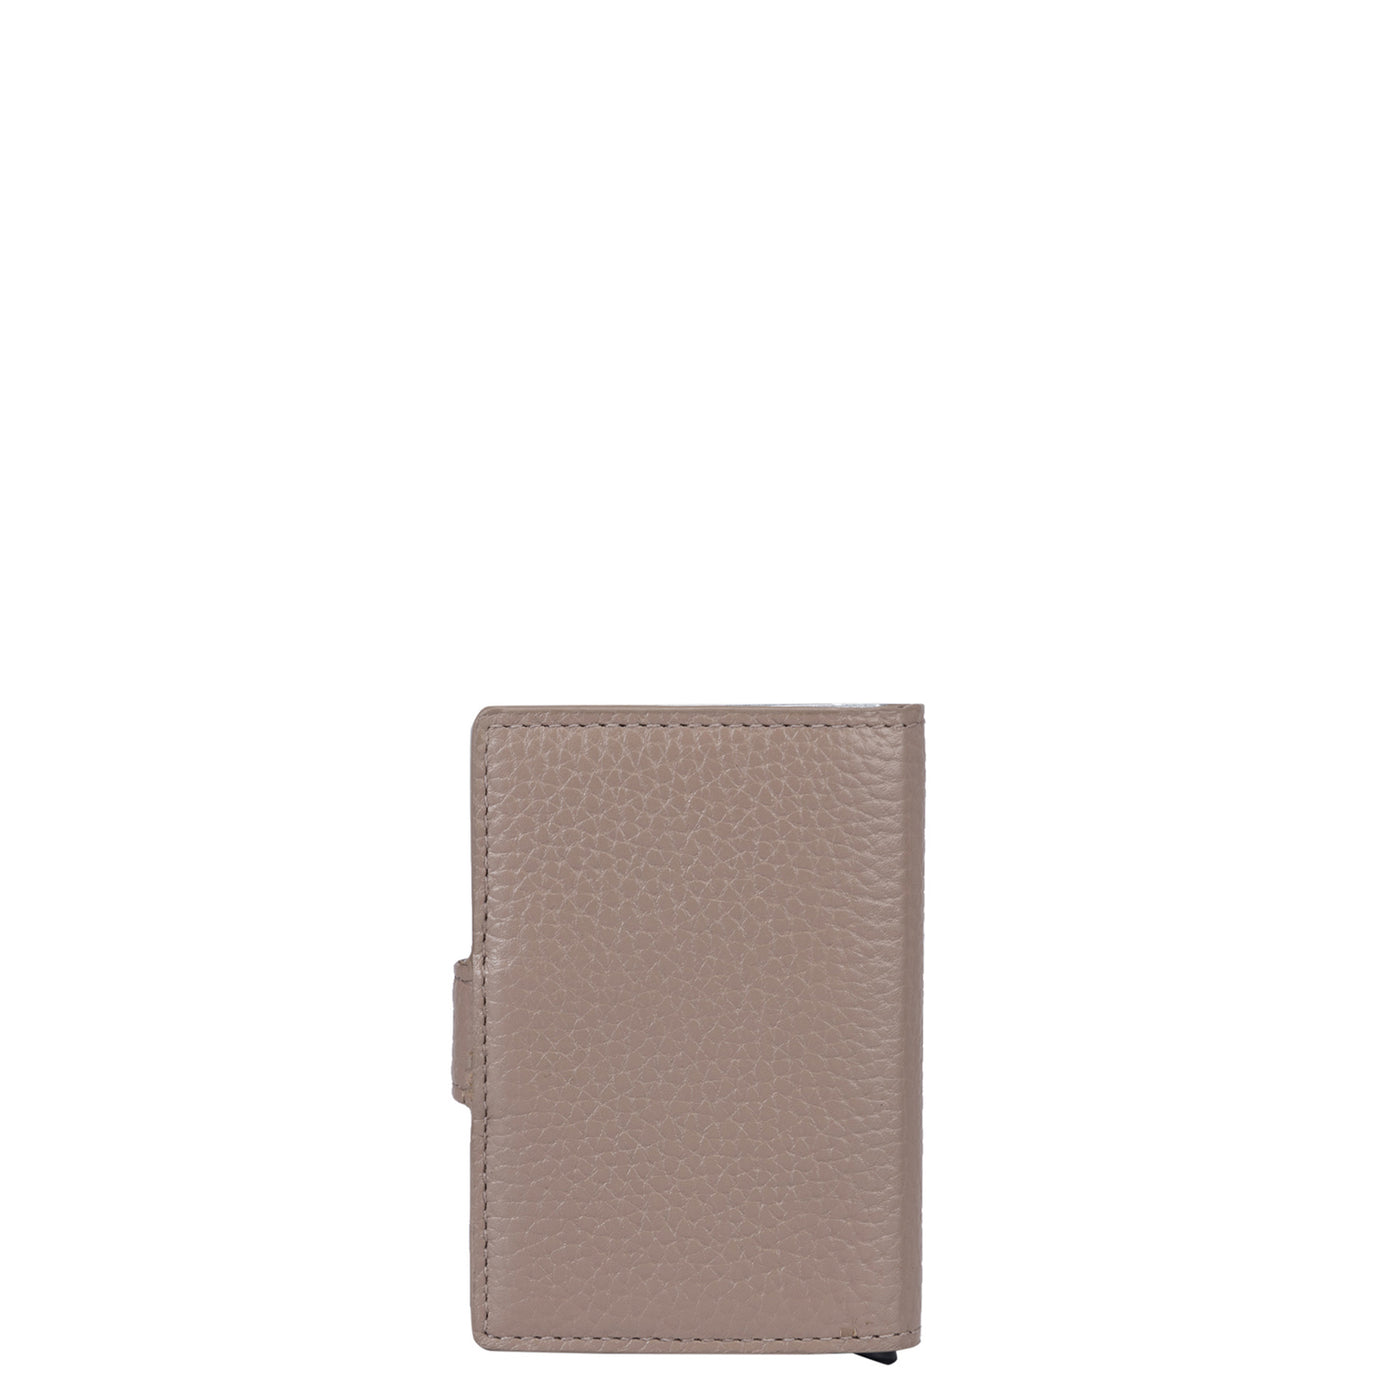 Wax Leather Card Case - Taupe